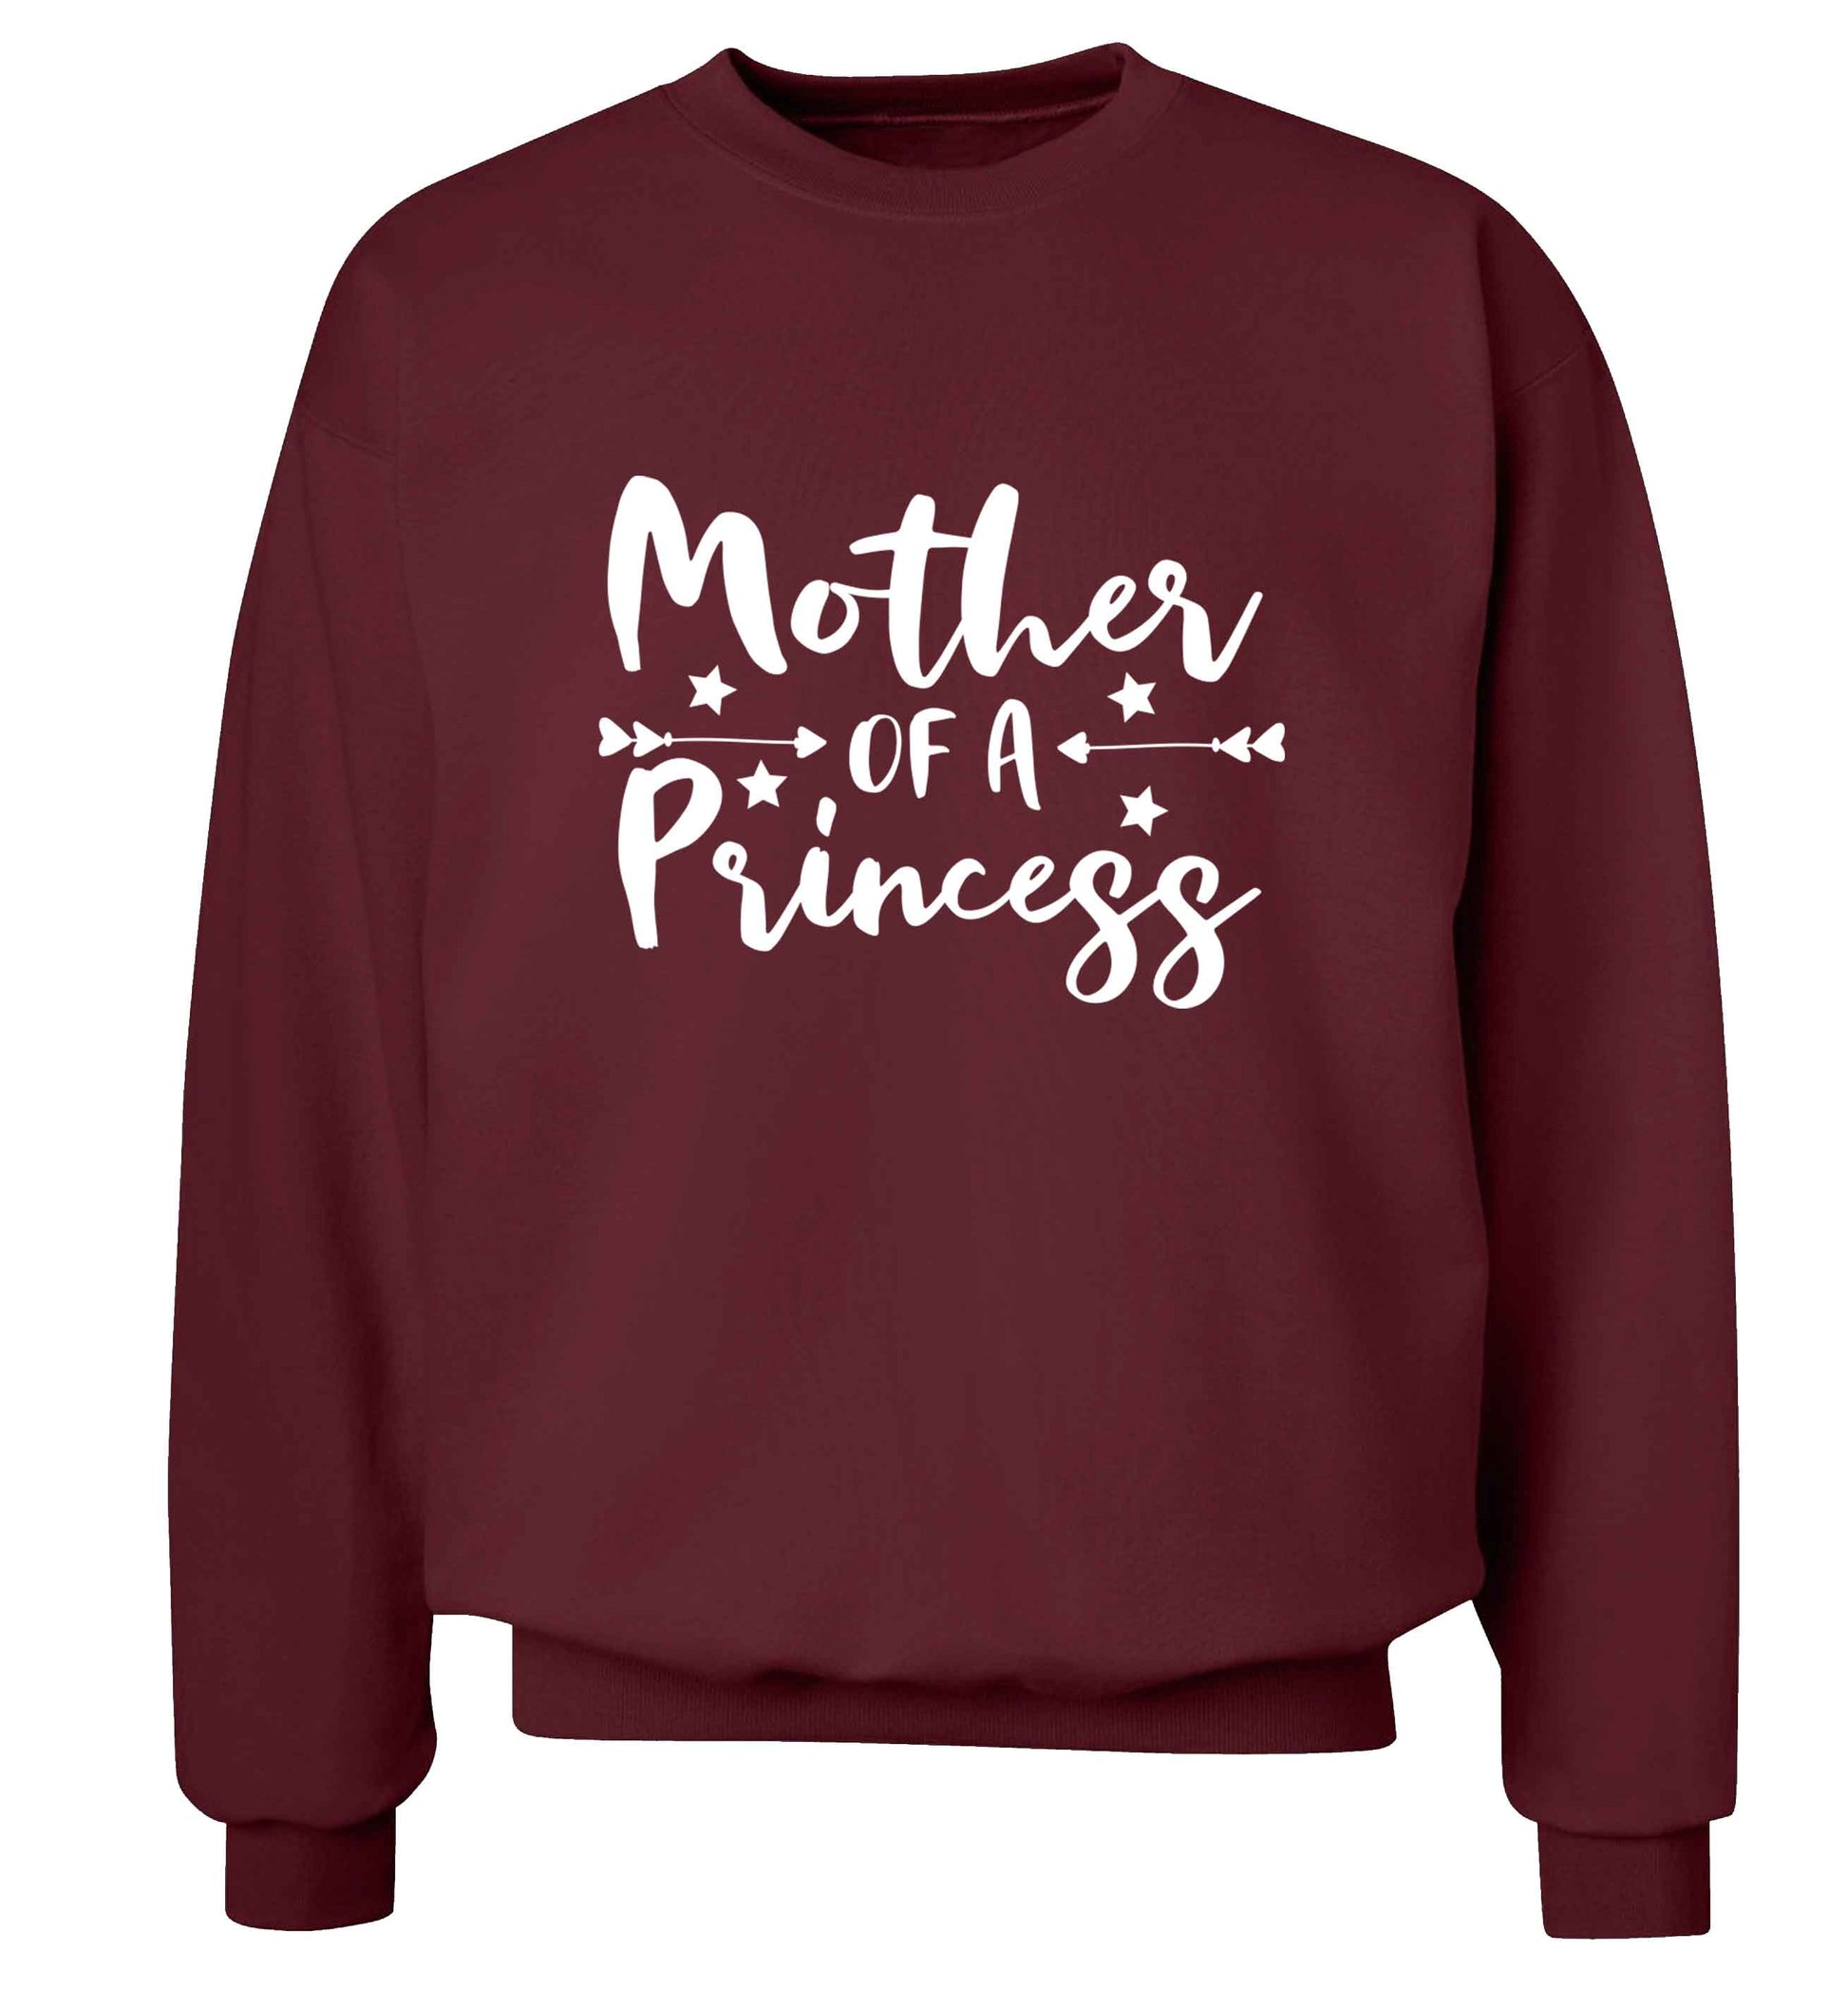 Mother of a princess adult's unisex maroon sweater 2XL